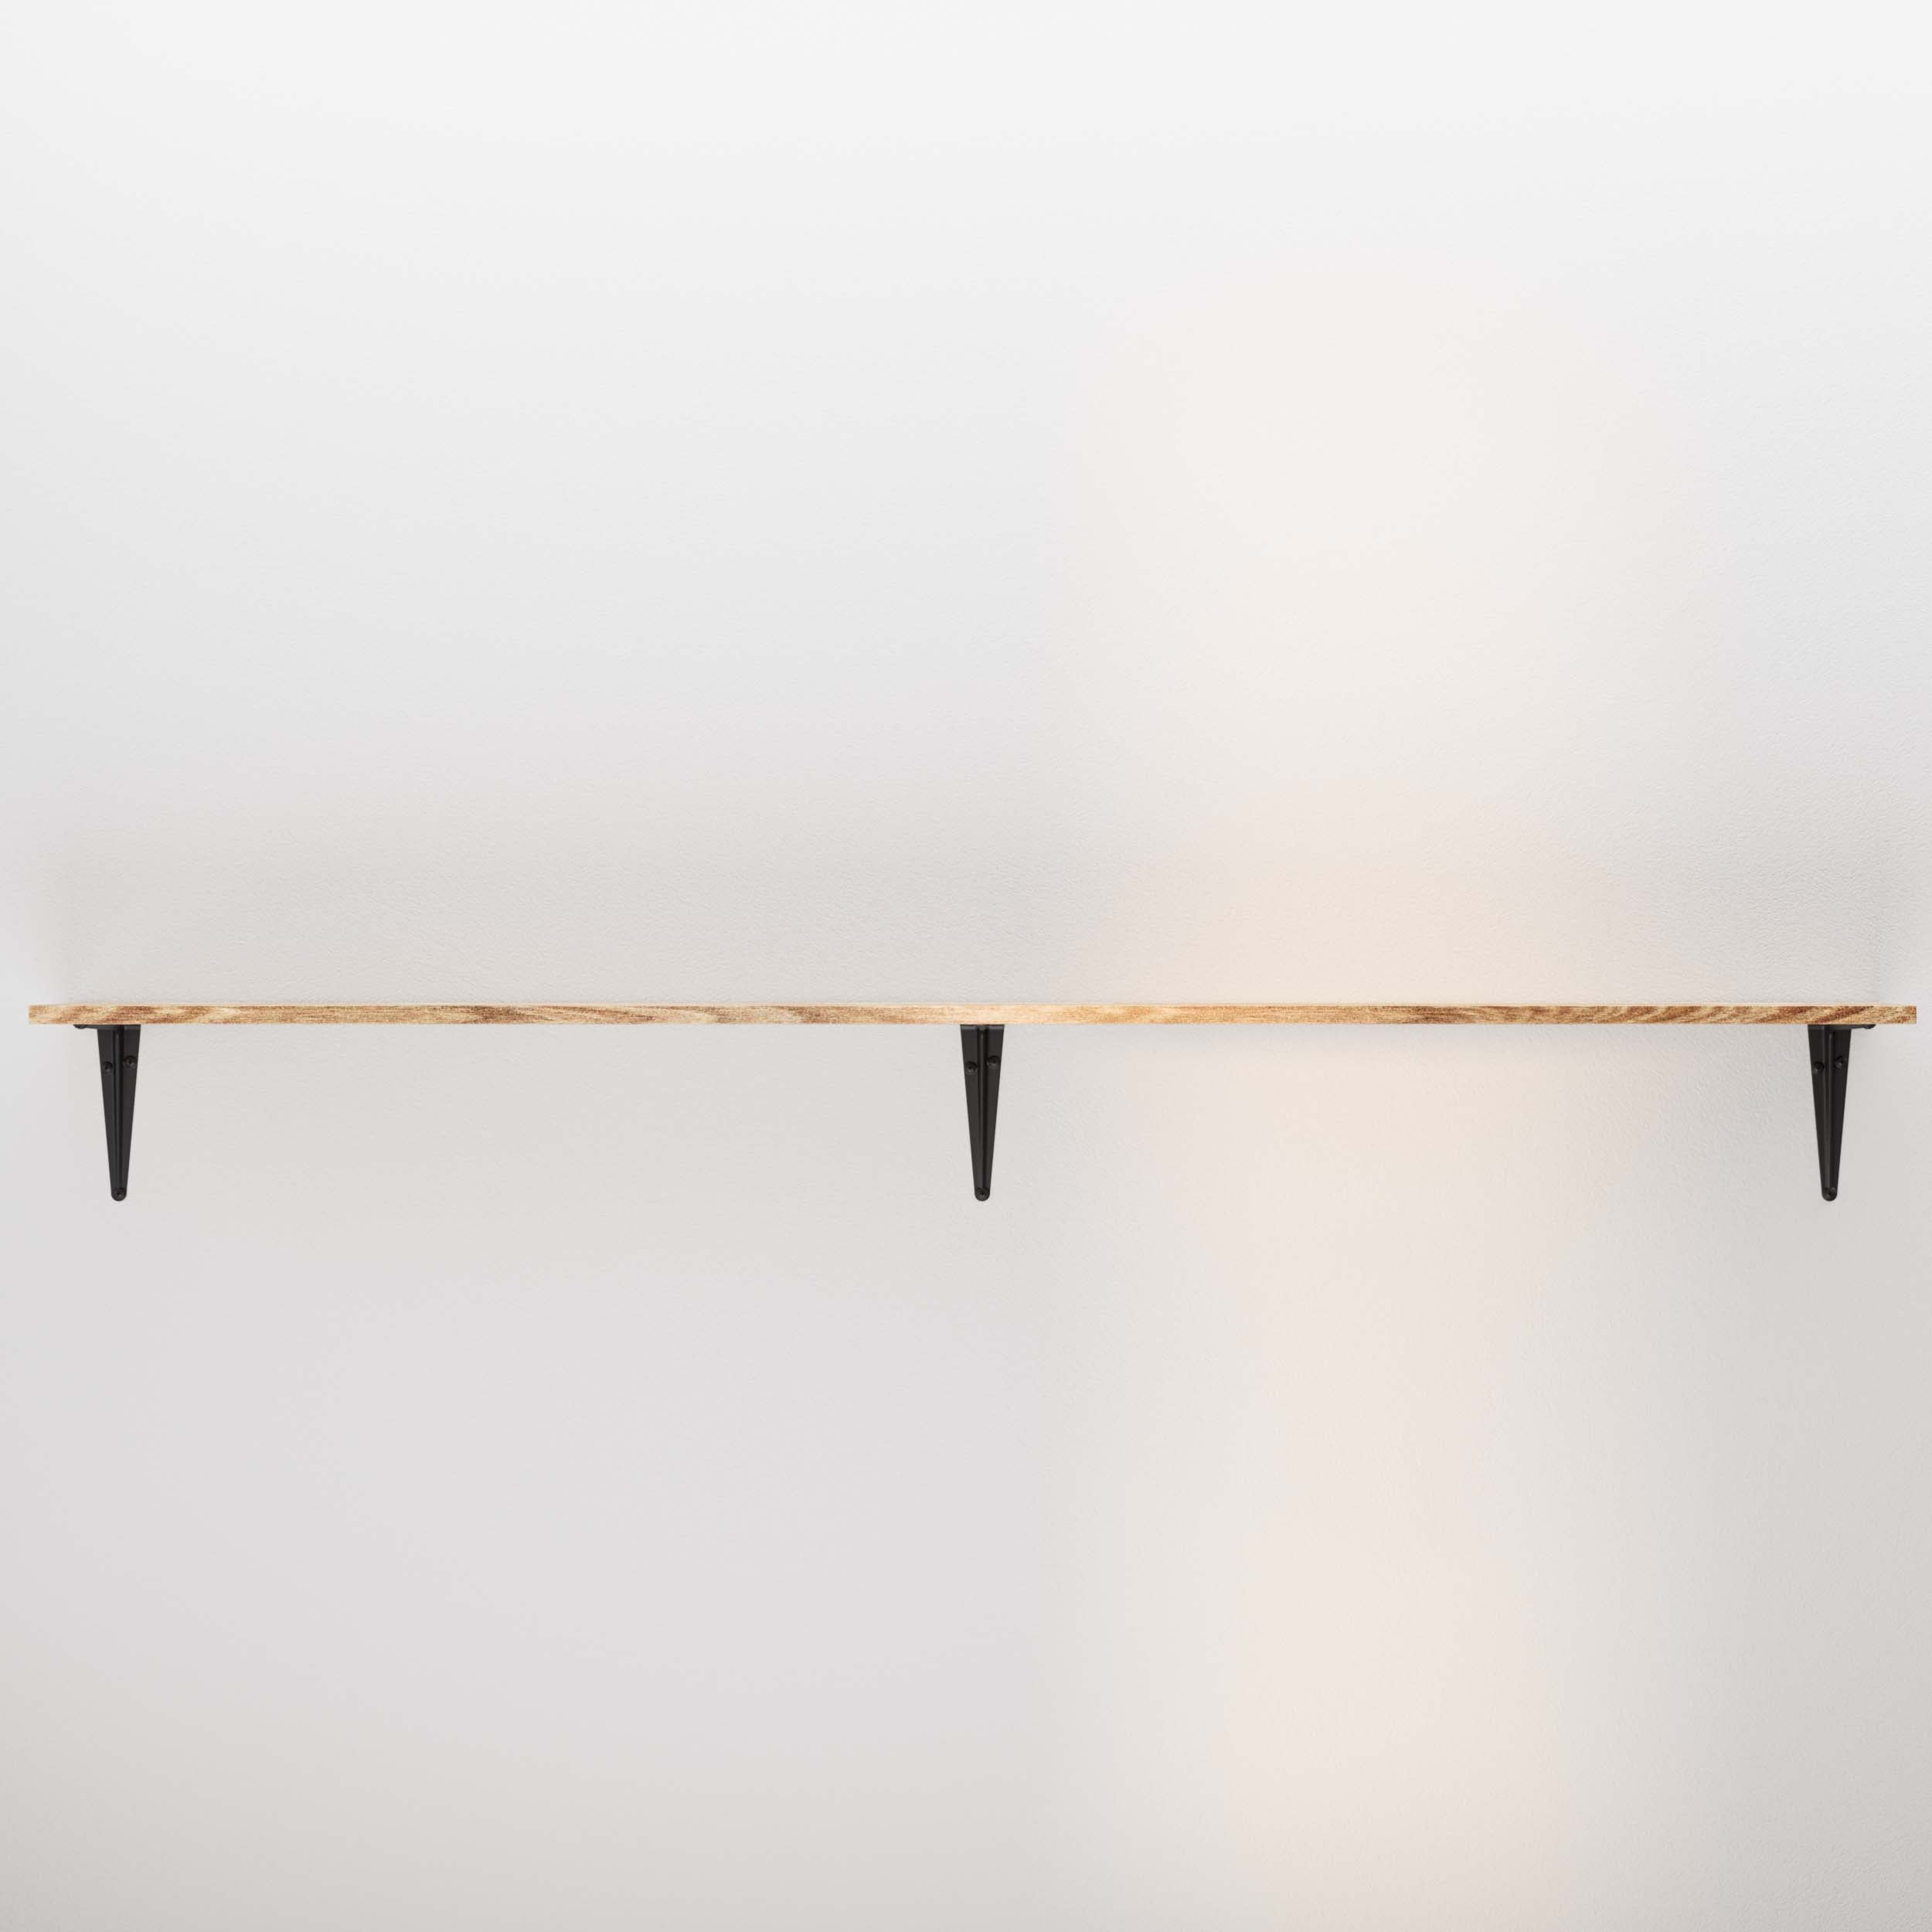 An empty wooden shelf supported by two black brackets, presenting a clean and minimalistic look against a white wall.